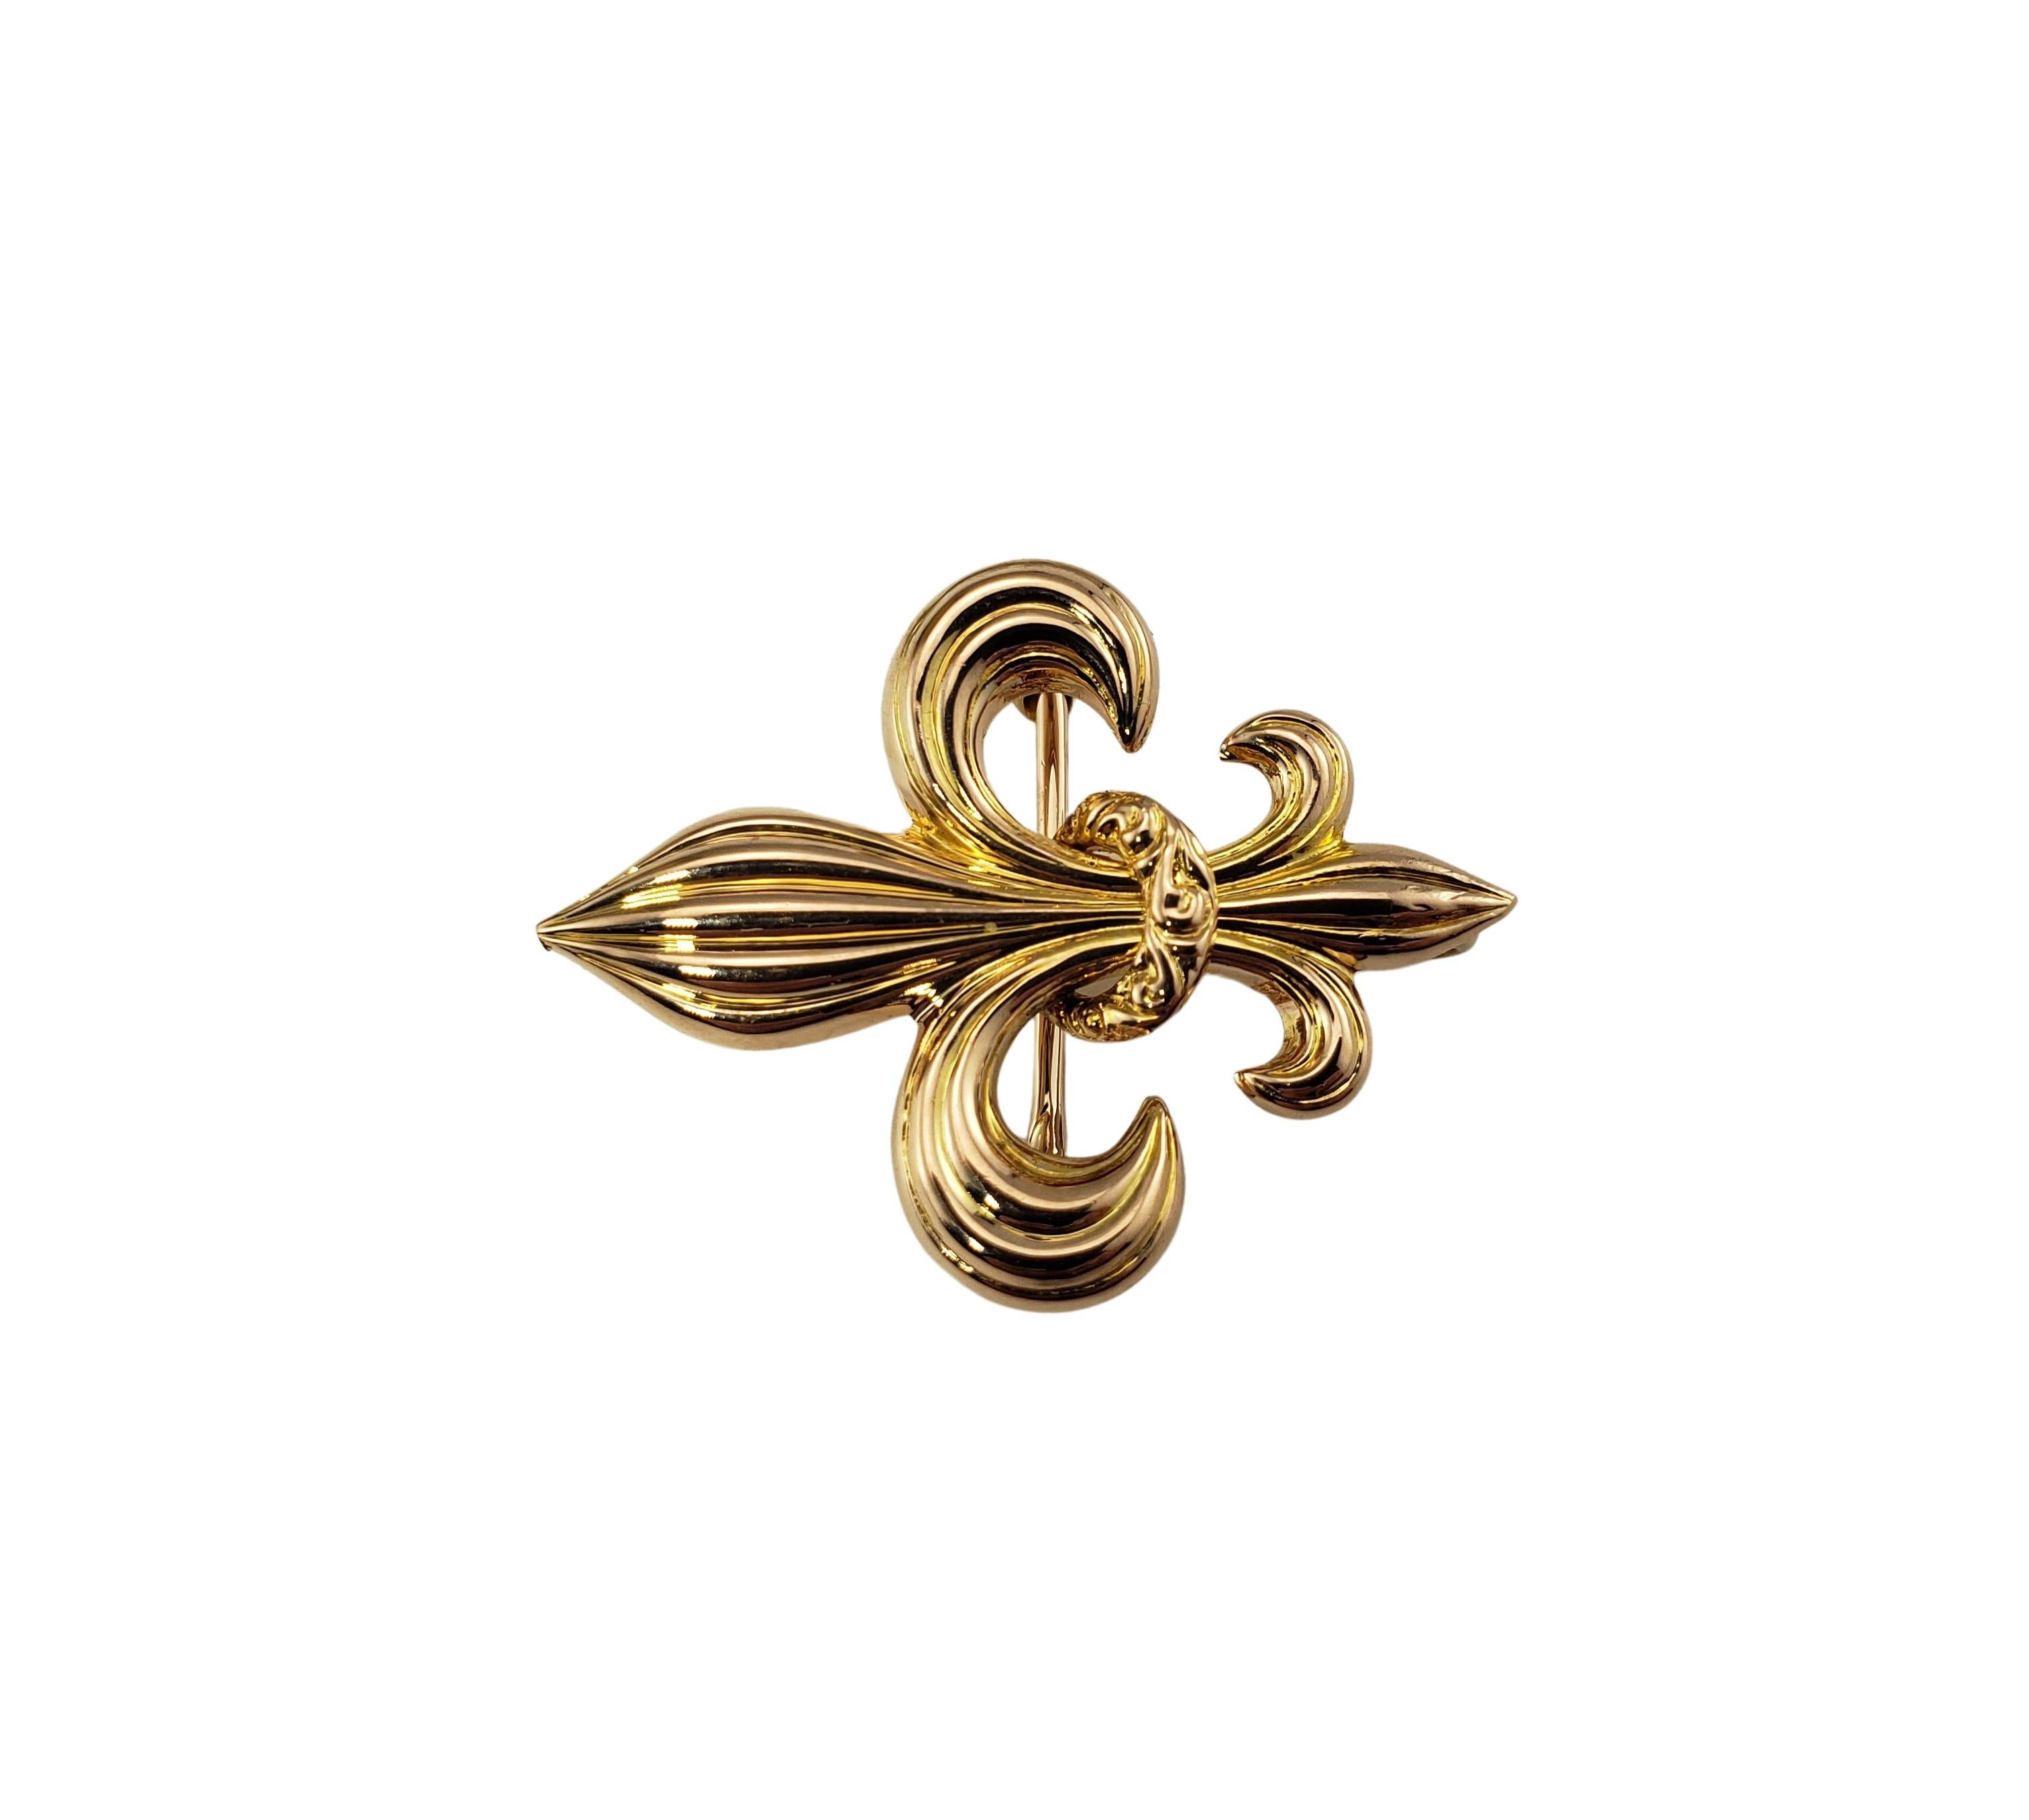 Vintage 10 Karat Yellow Gold Fleur de Lis Brooch/Pendant-

This lovely brooch features a Fleur de Lis crafted in beautifully detailed 10K yellow gold. Can be worn as a brooch or a pendant.

Size: 26 mm x 20 mm

Weight: 1.2 dwt. / 2.0 gr.

Stamped: